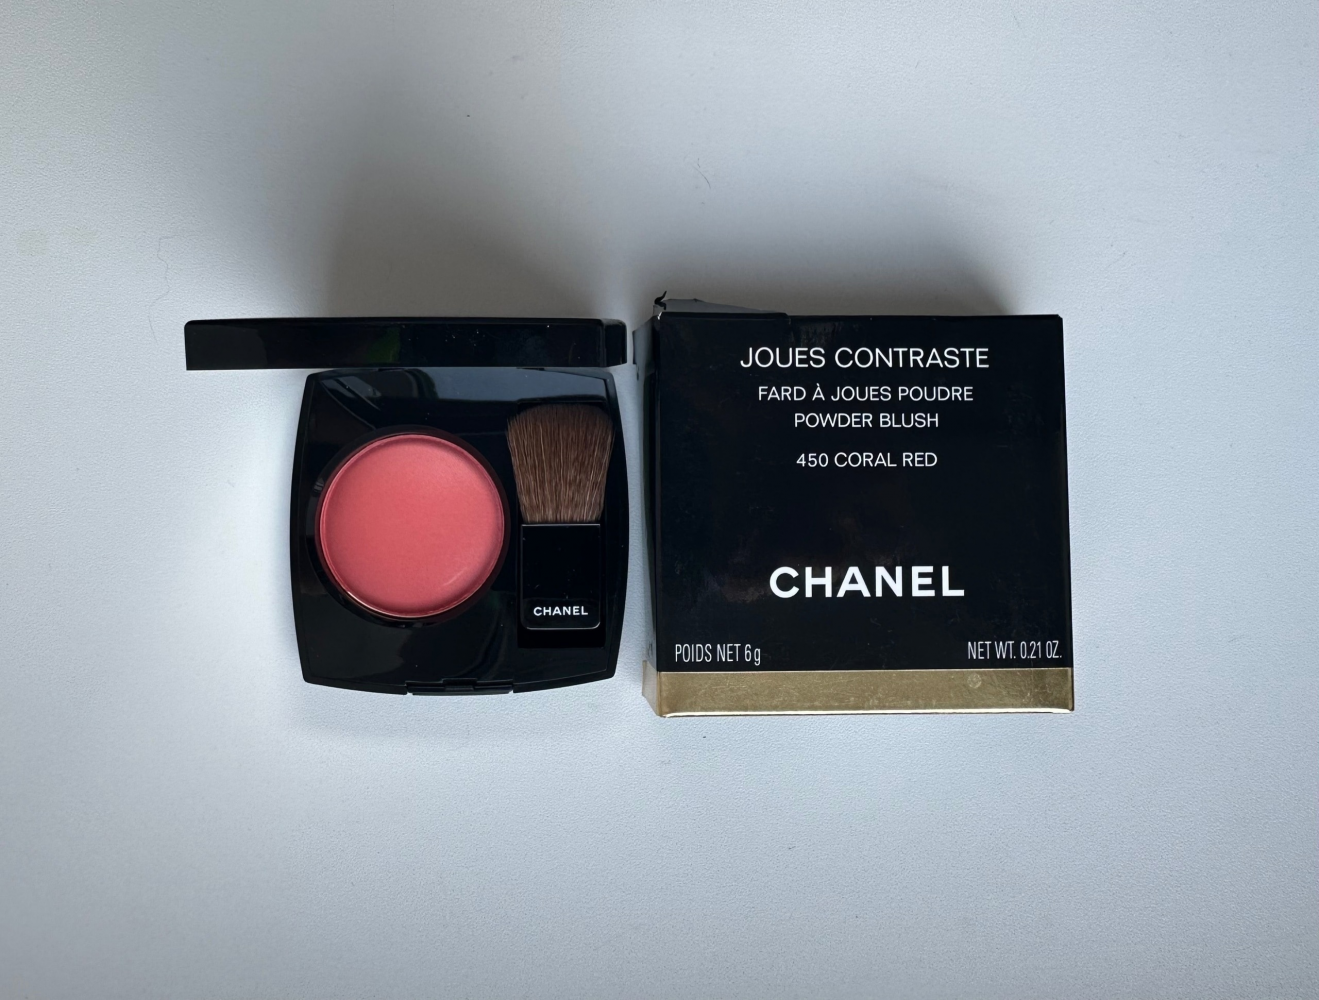 Chanel румяна 450 coral red